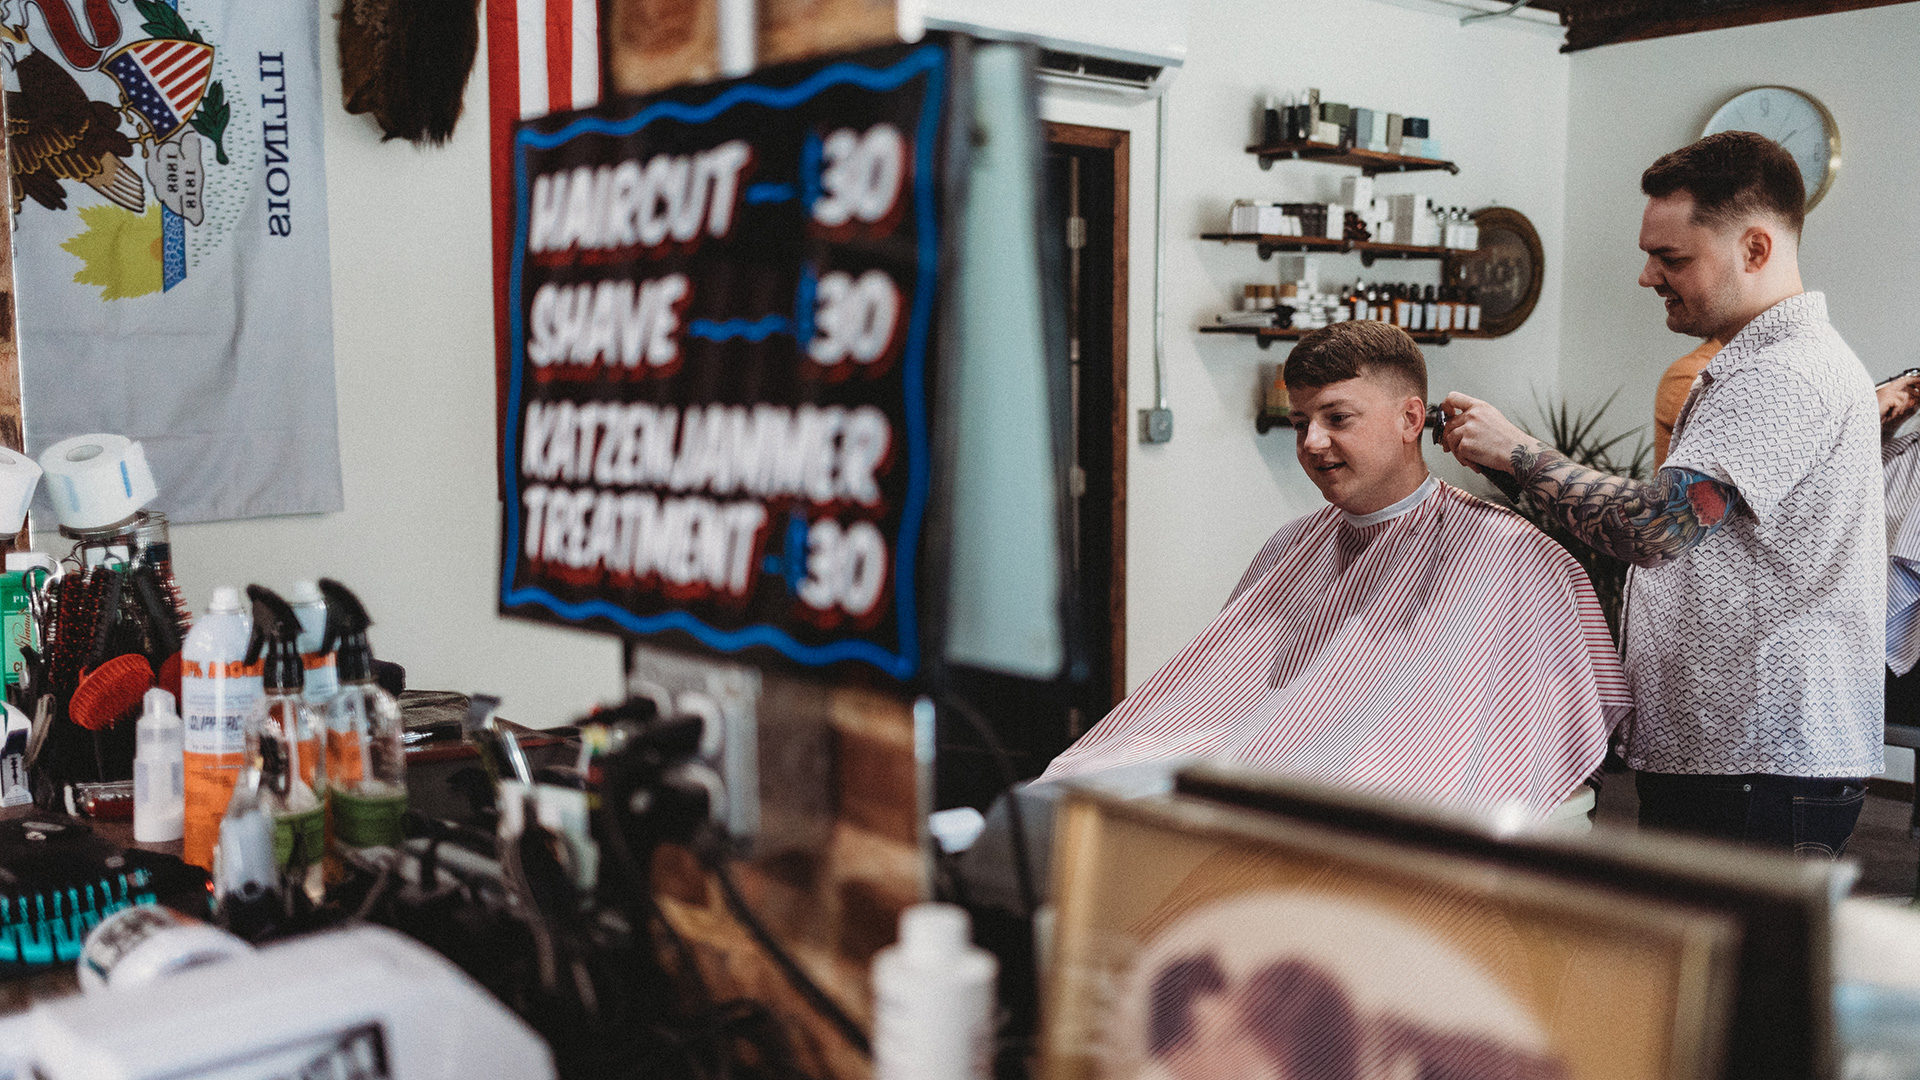 Barber cutting hair with pricing sign and cutting supplies in background